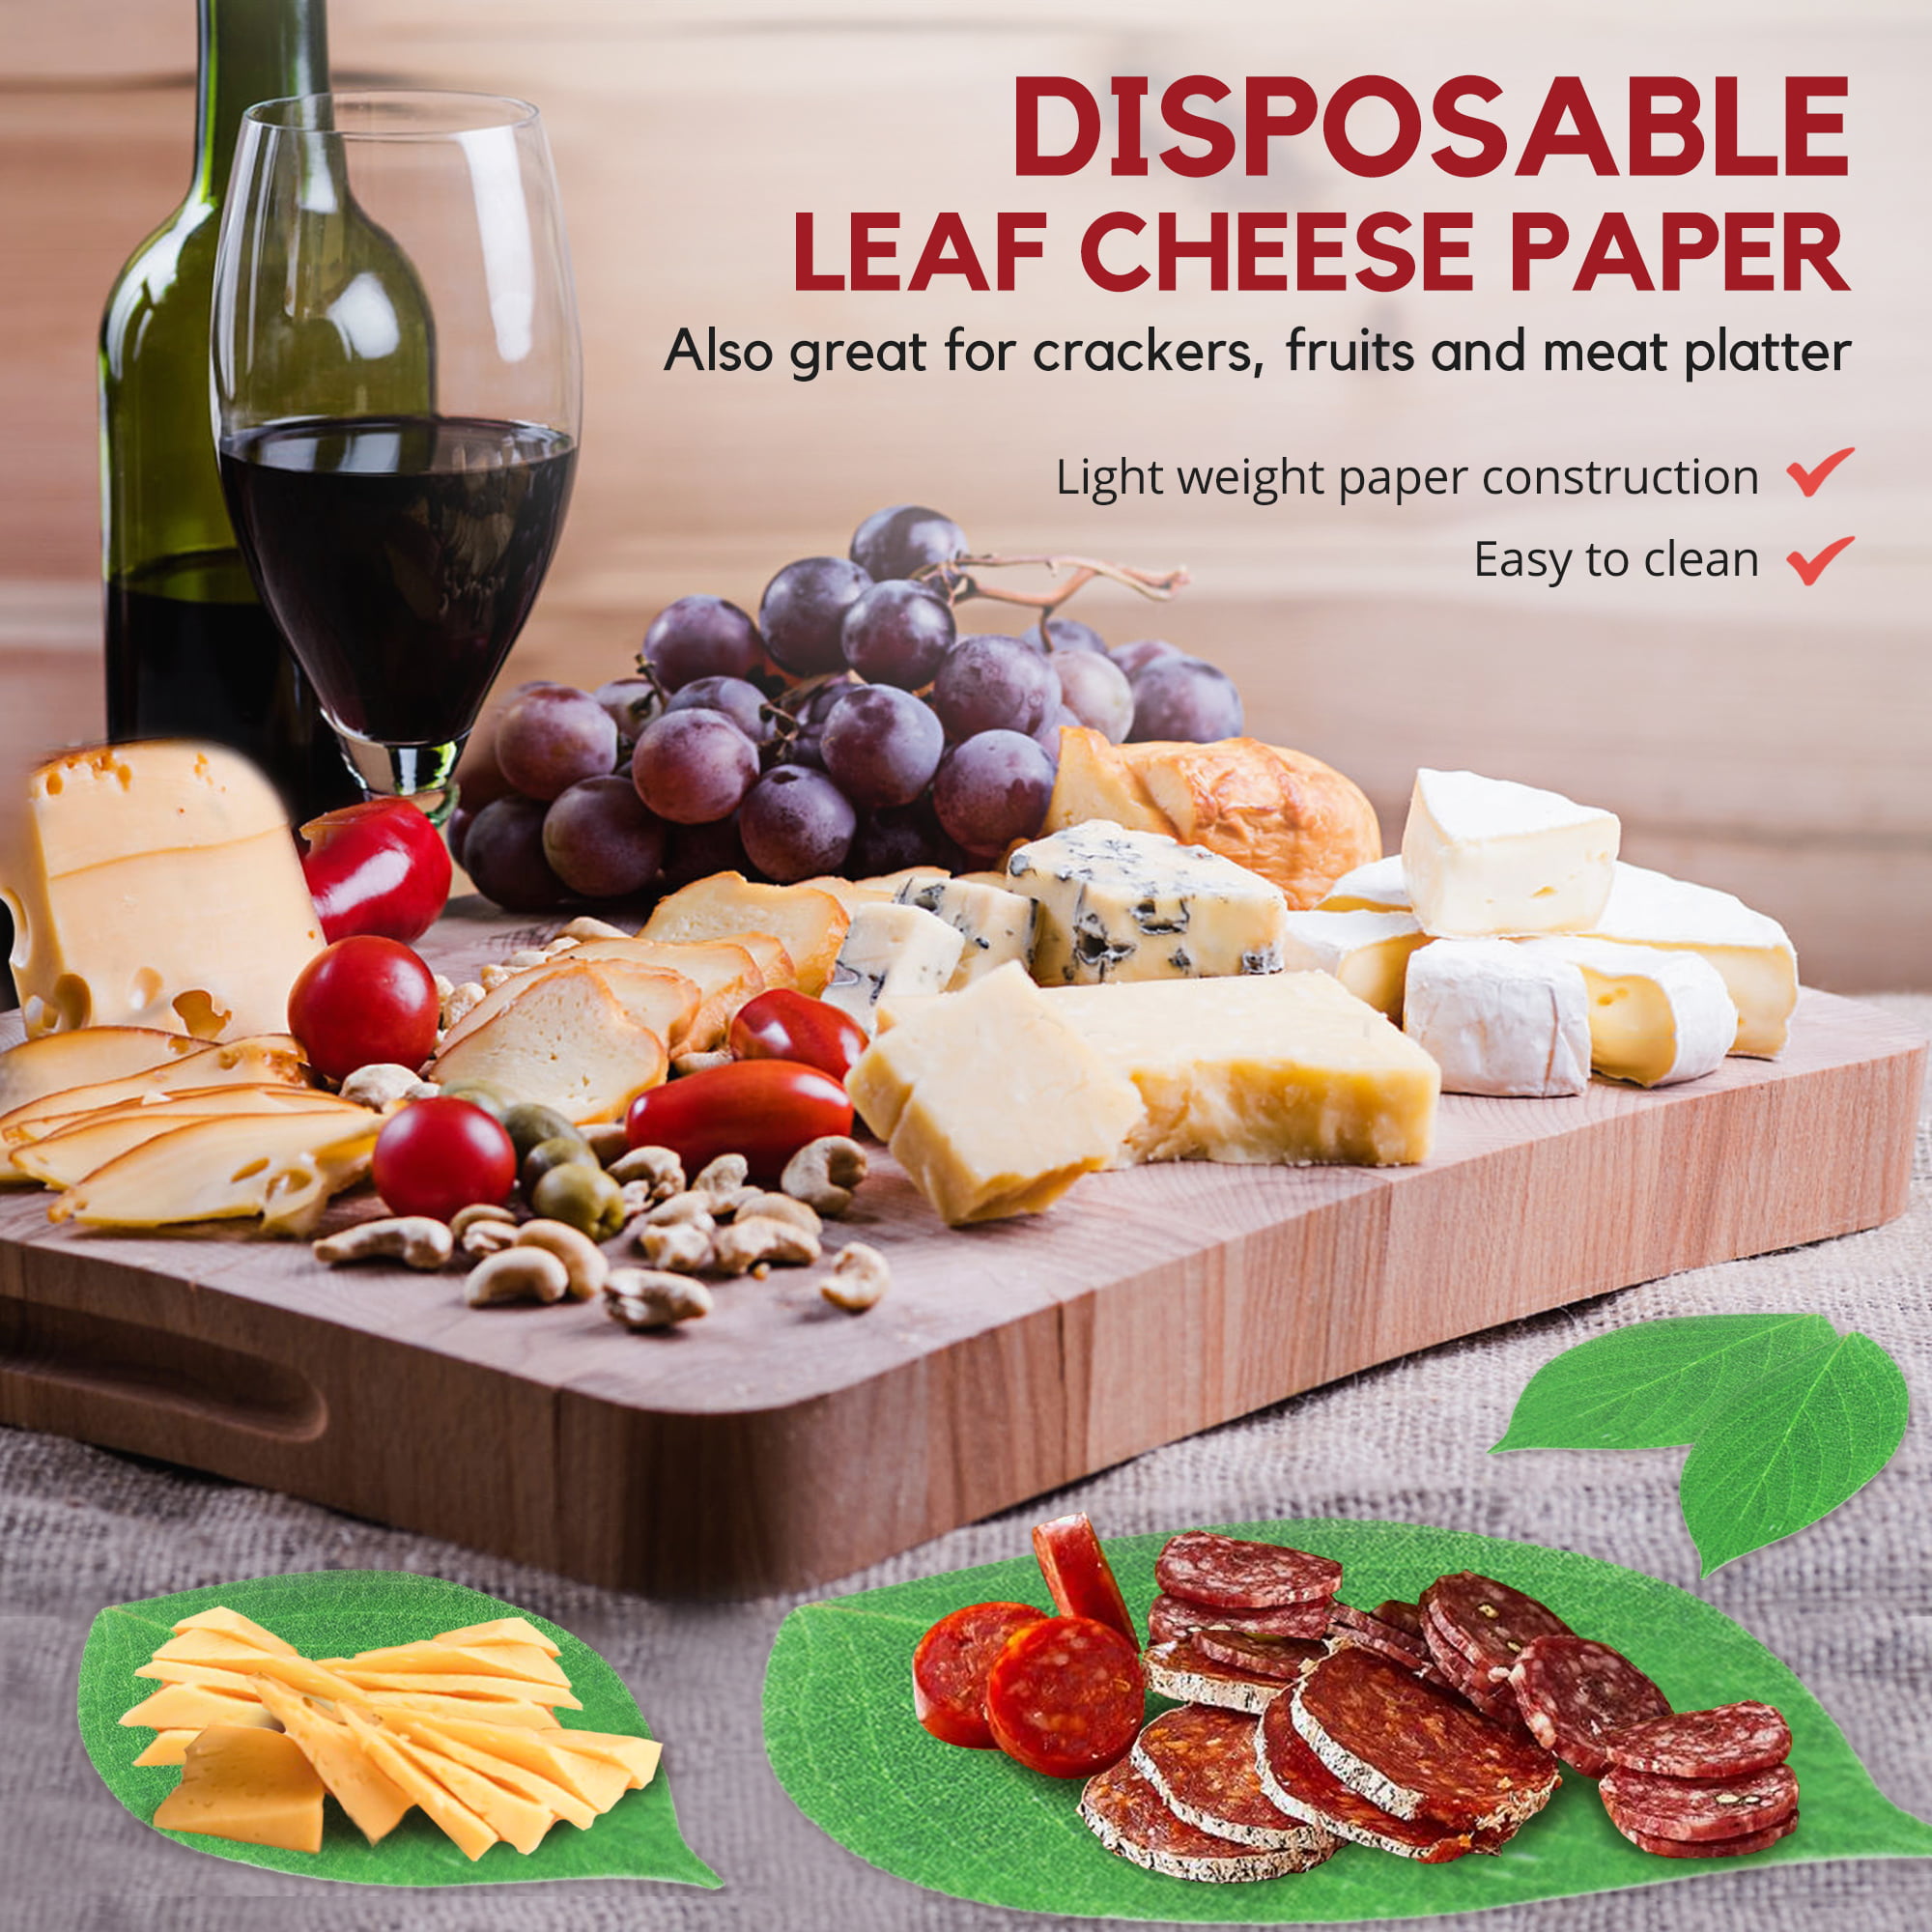 25 Pack] Leaf Cheese Paper for Charcuterie Boards - 7 x 4”Cheeseboard  Accessories, Disposable Grease Resistant Decorative Parchment Sheets in  Serving Tray, Crackers, Fruits, Sushi Meat Platter 